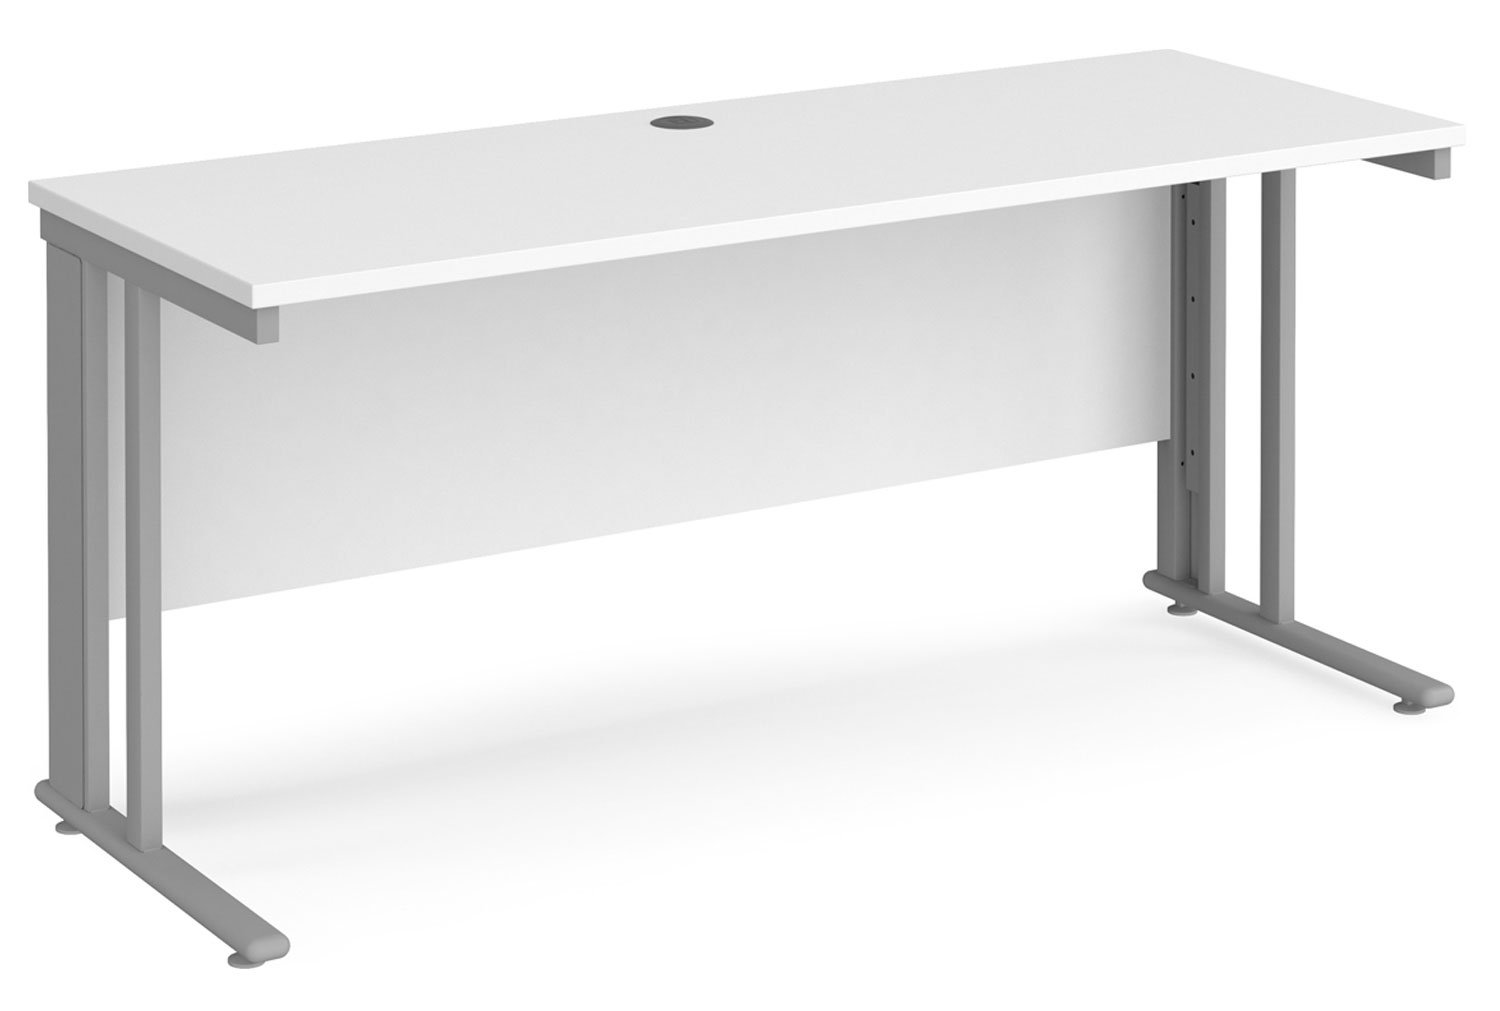 Value Line Deluxe Cable Managed Narrow Rectangular Office Desk (Silver Legs), 160wx60dx73h (cm), White, Express Delivery